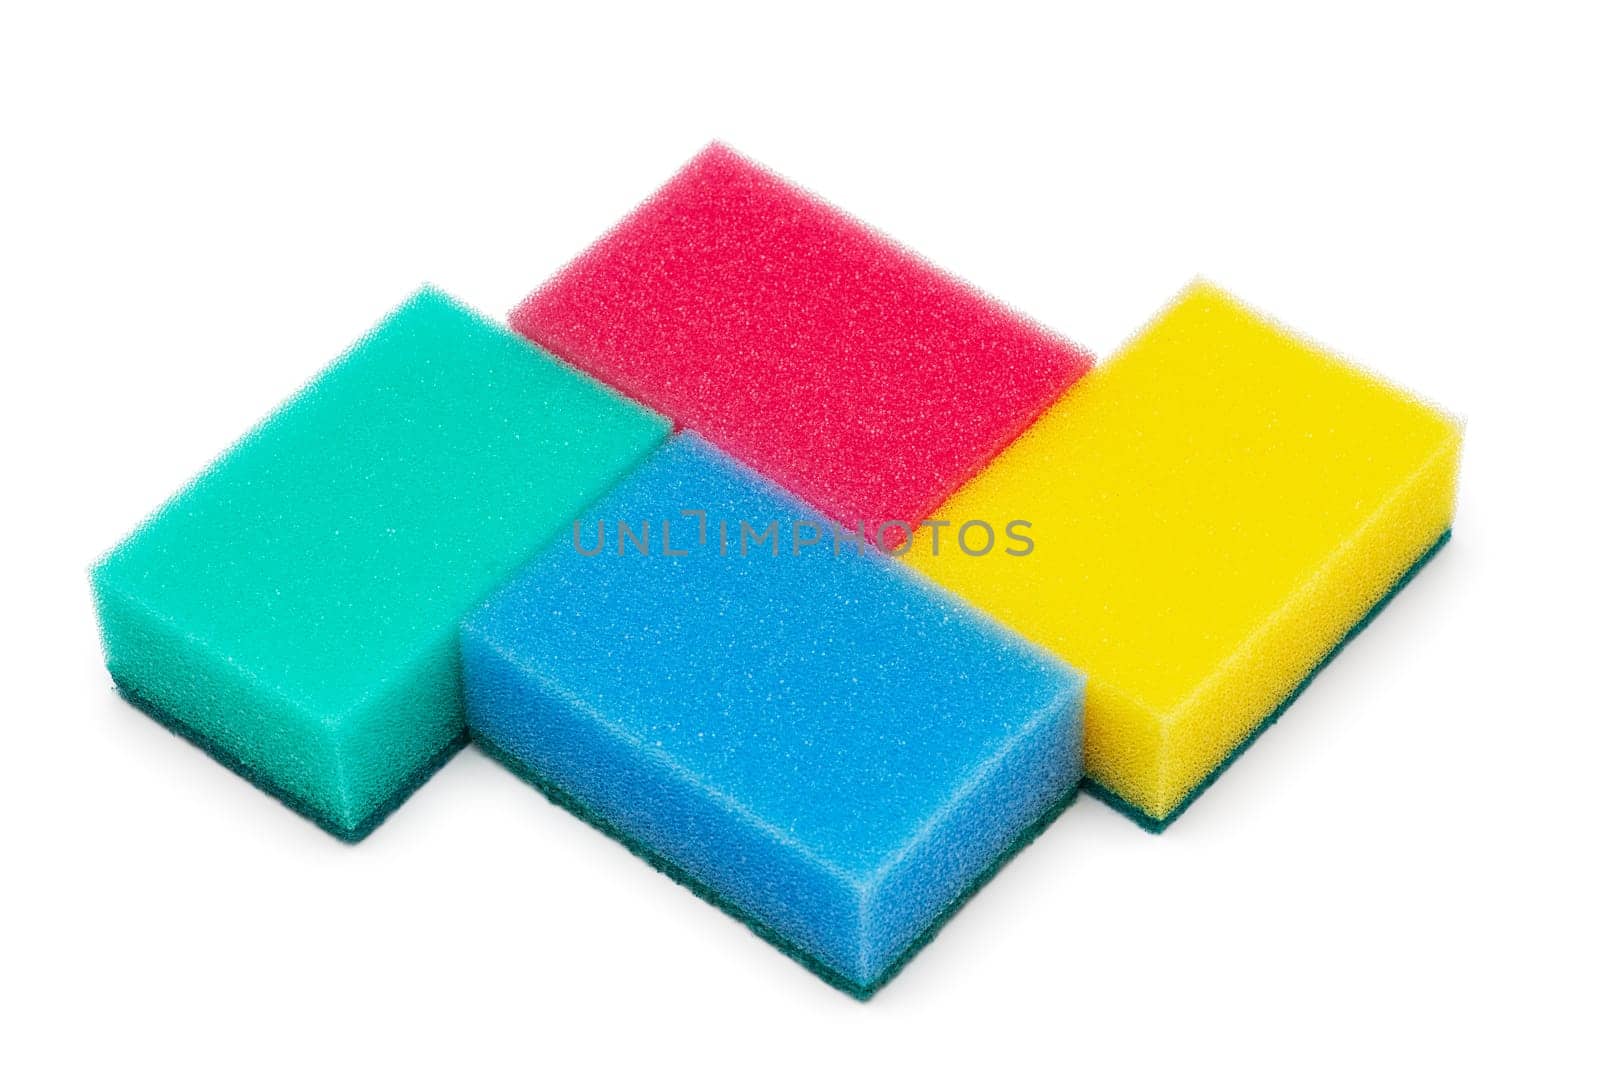 Group of foam sponges of bright colored for everyday washing and cleaning of kitchen utensils by Alexander-Piragis